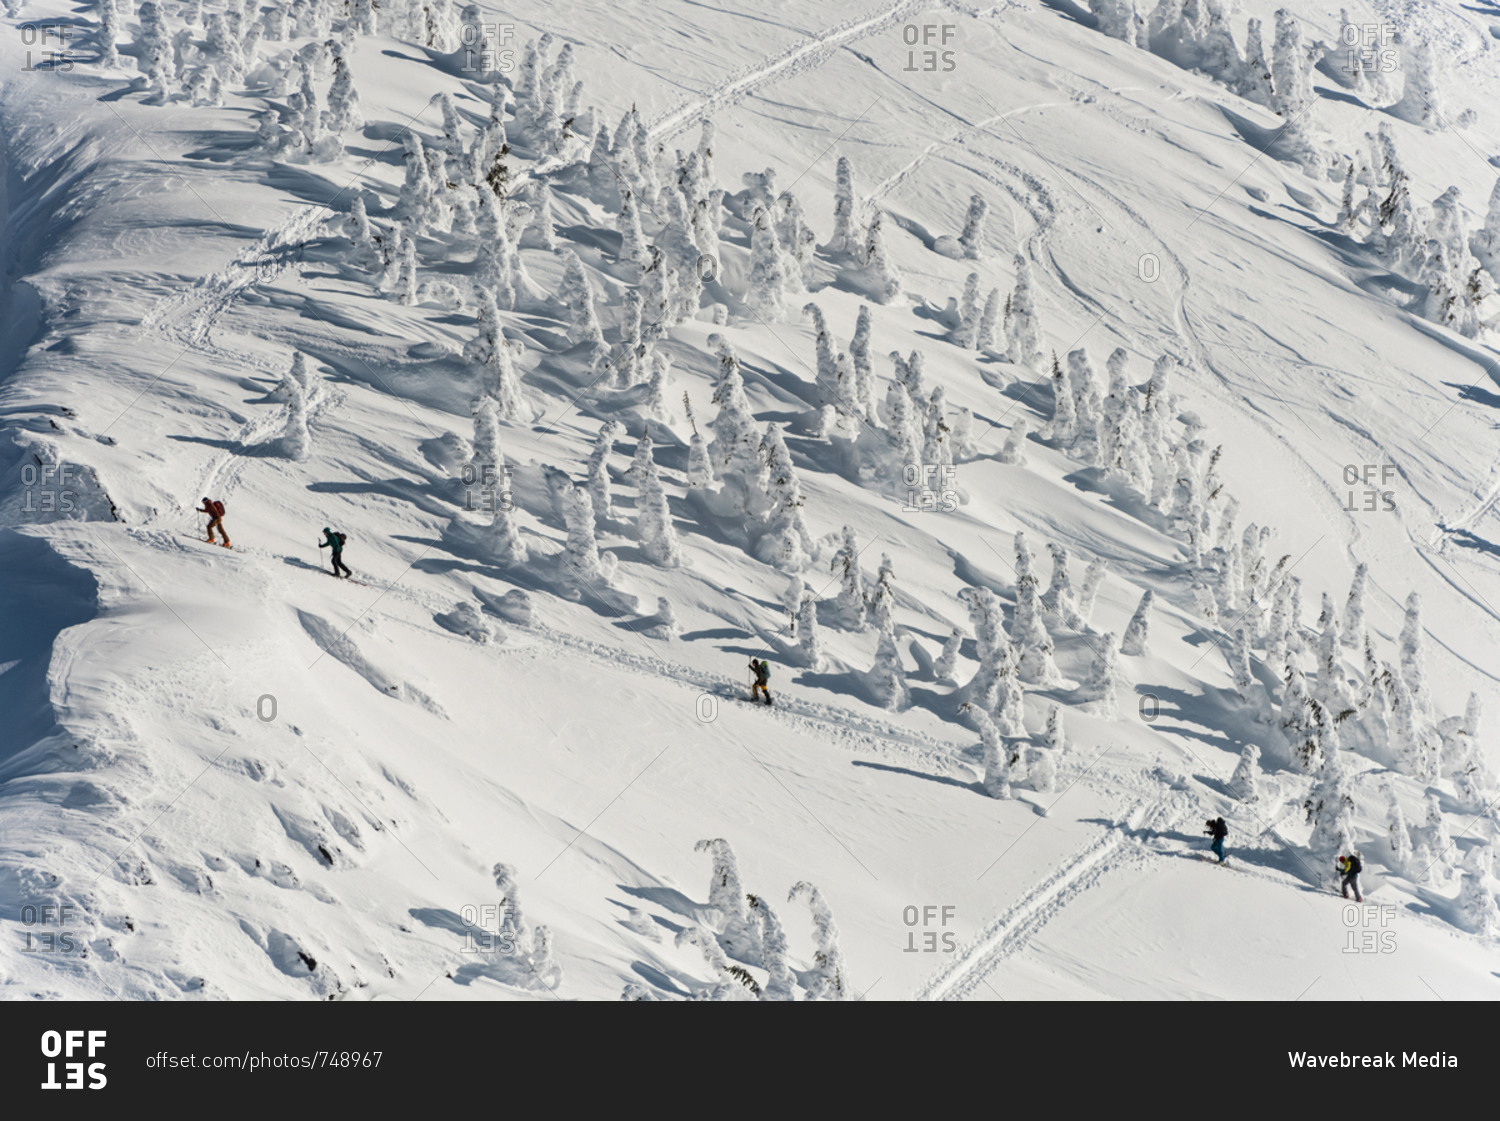 Group of skiers walking on a snowy mountain during winter